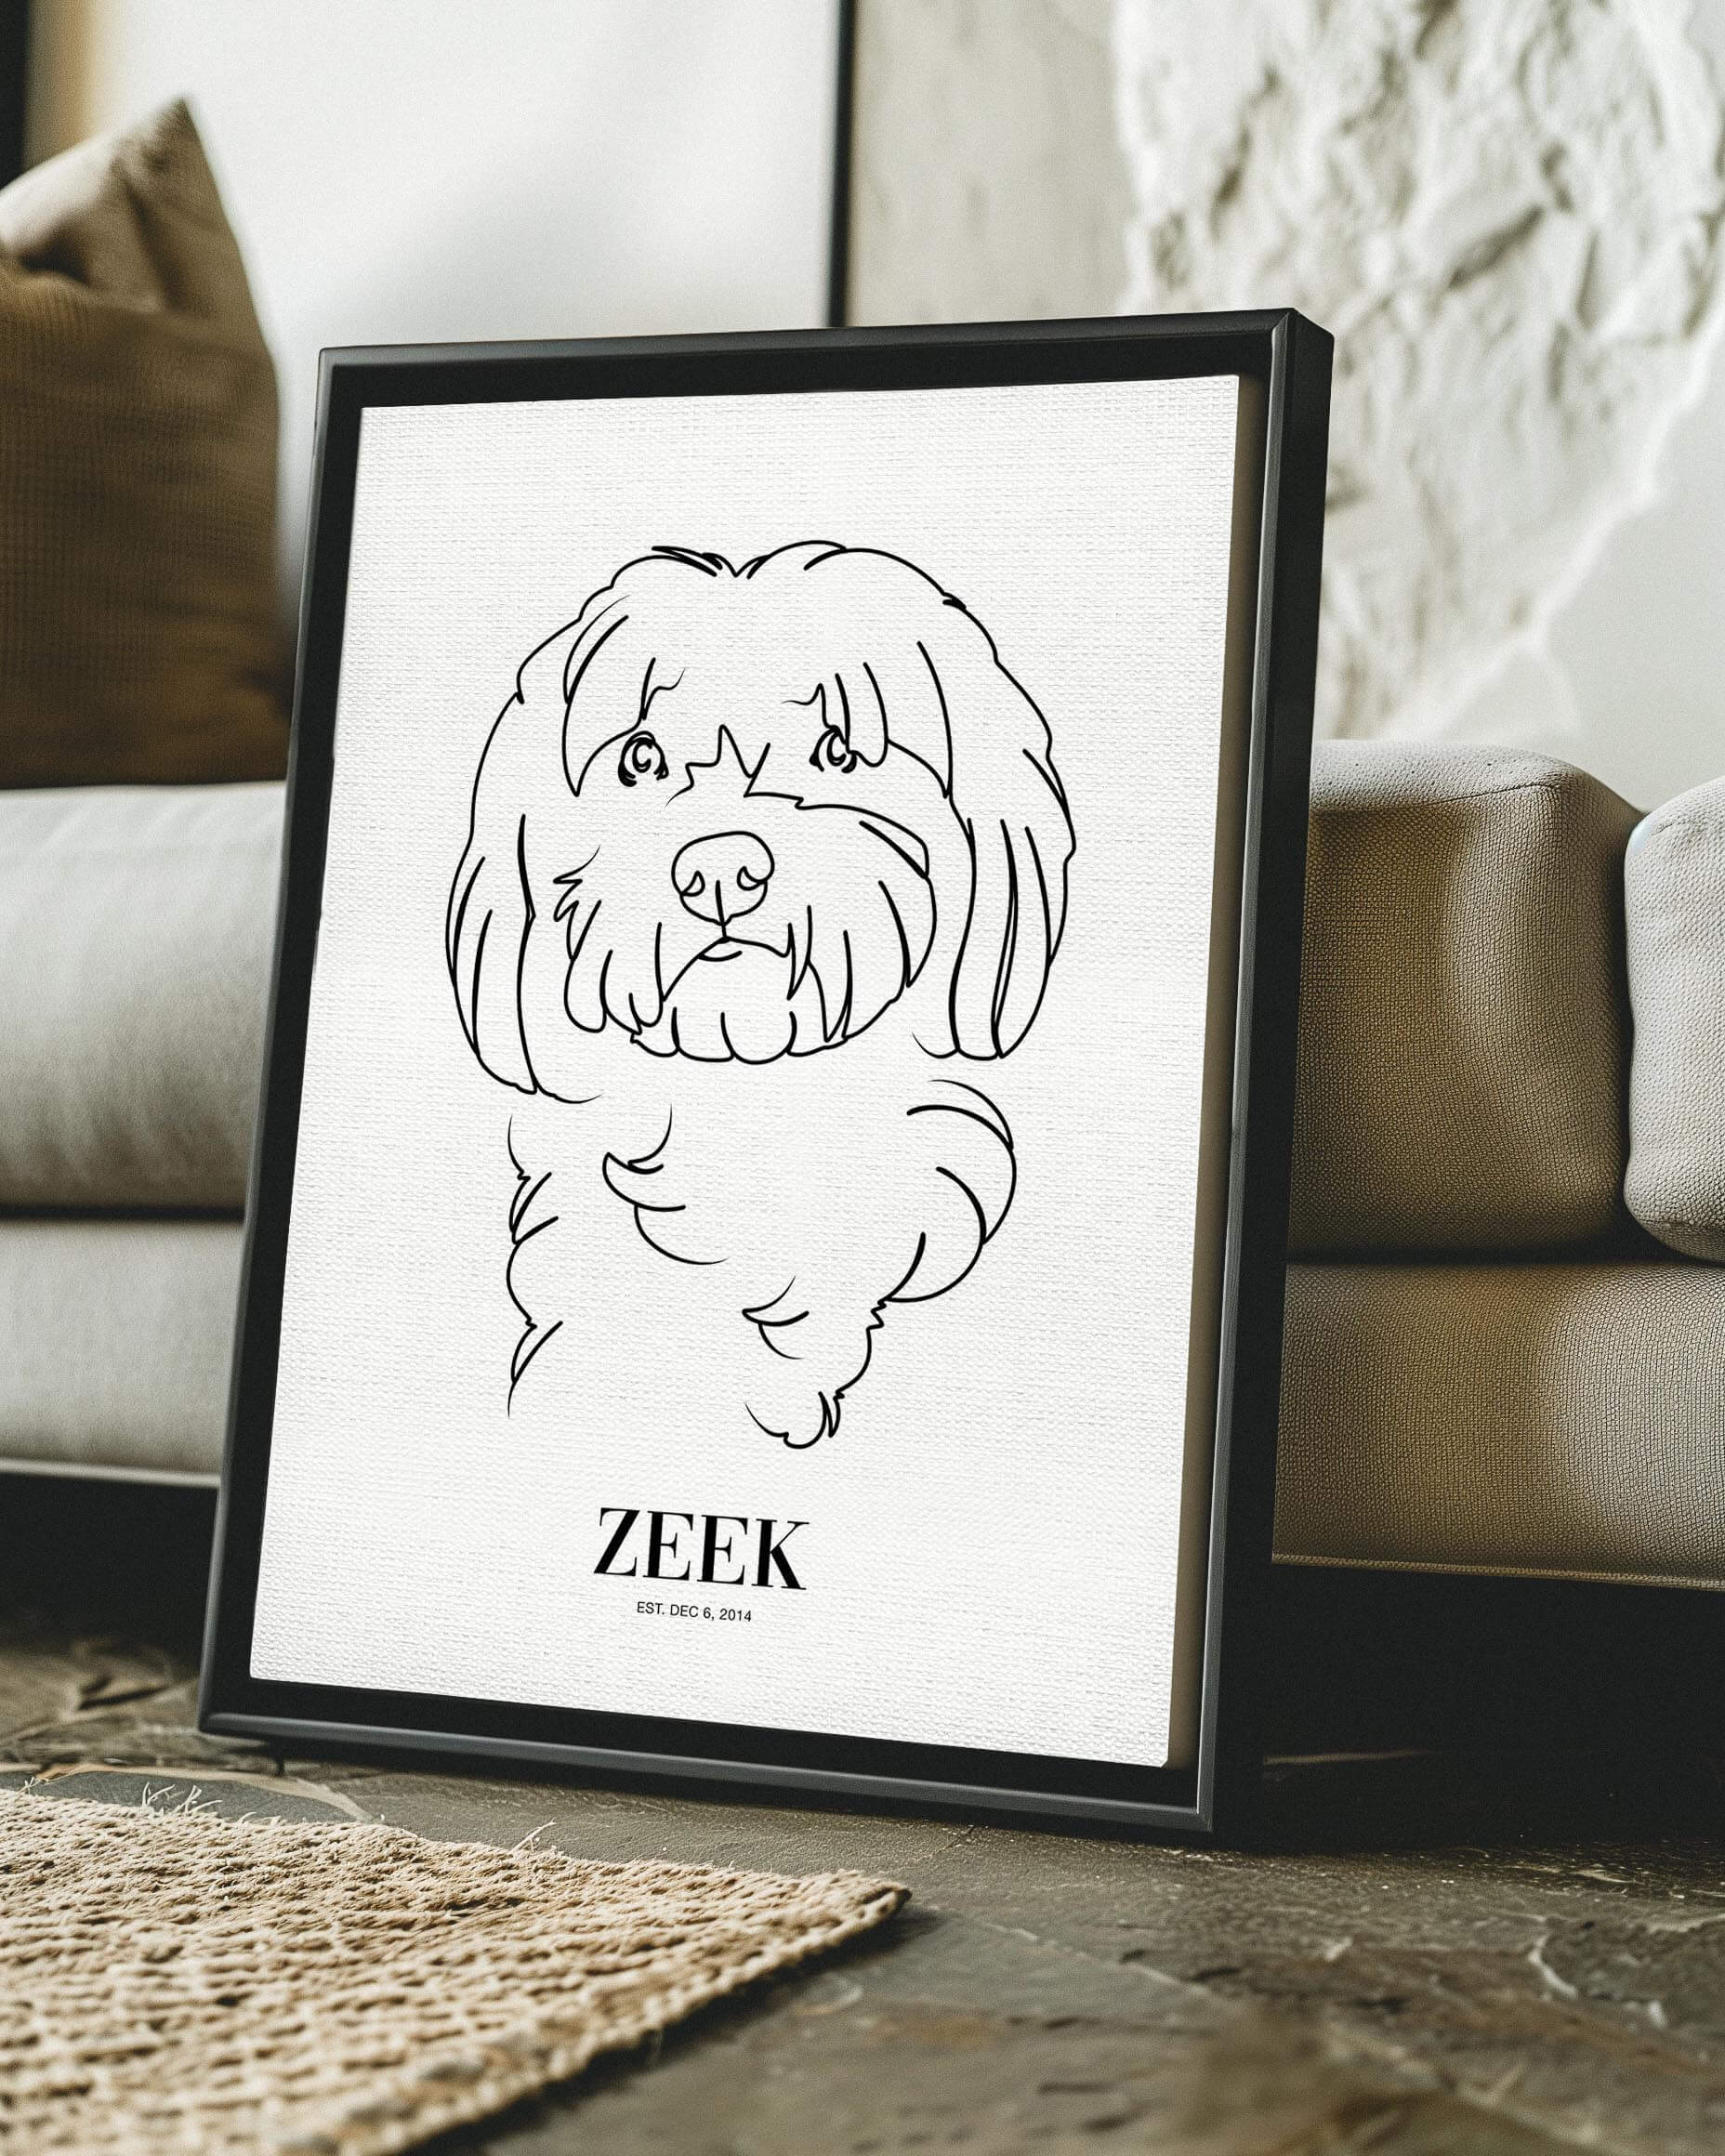 dog print line drawing custom art on canvas and mounted on wall of contemporary home decor living space creating a unique custom gift idea for dog mom and dog dad pet parents made by vogue paws personalized pet portrait dog art